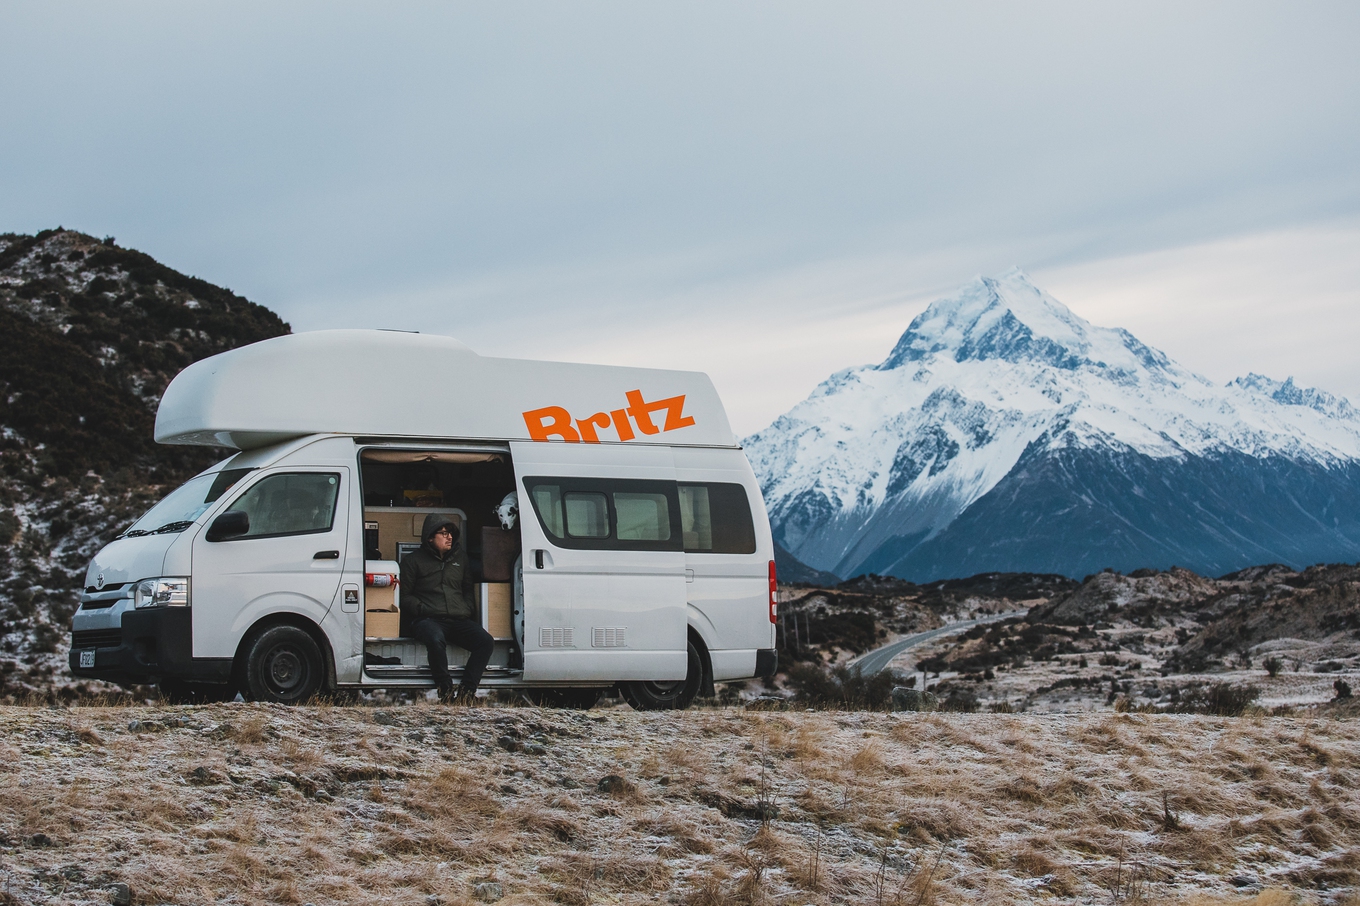 A man on a roadtrip holiday sits in a campervan in front of a mountain